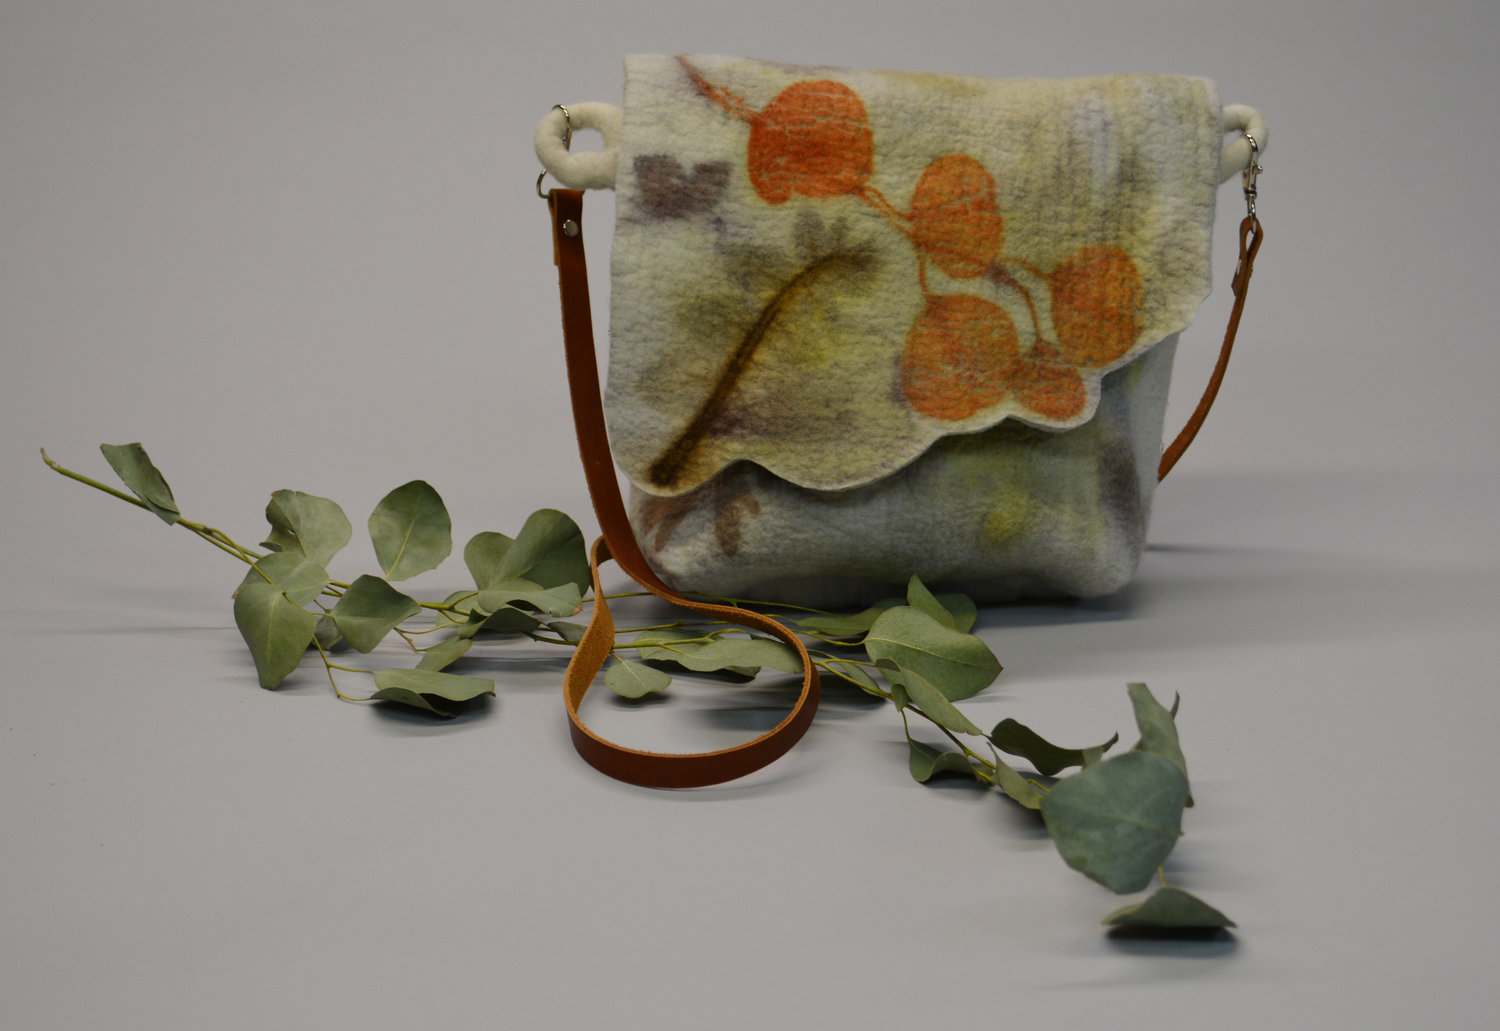 Handmade felted purse by Ellen Silberlicht, eco-printed with leaves.